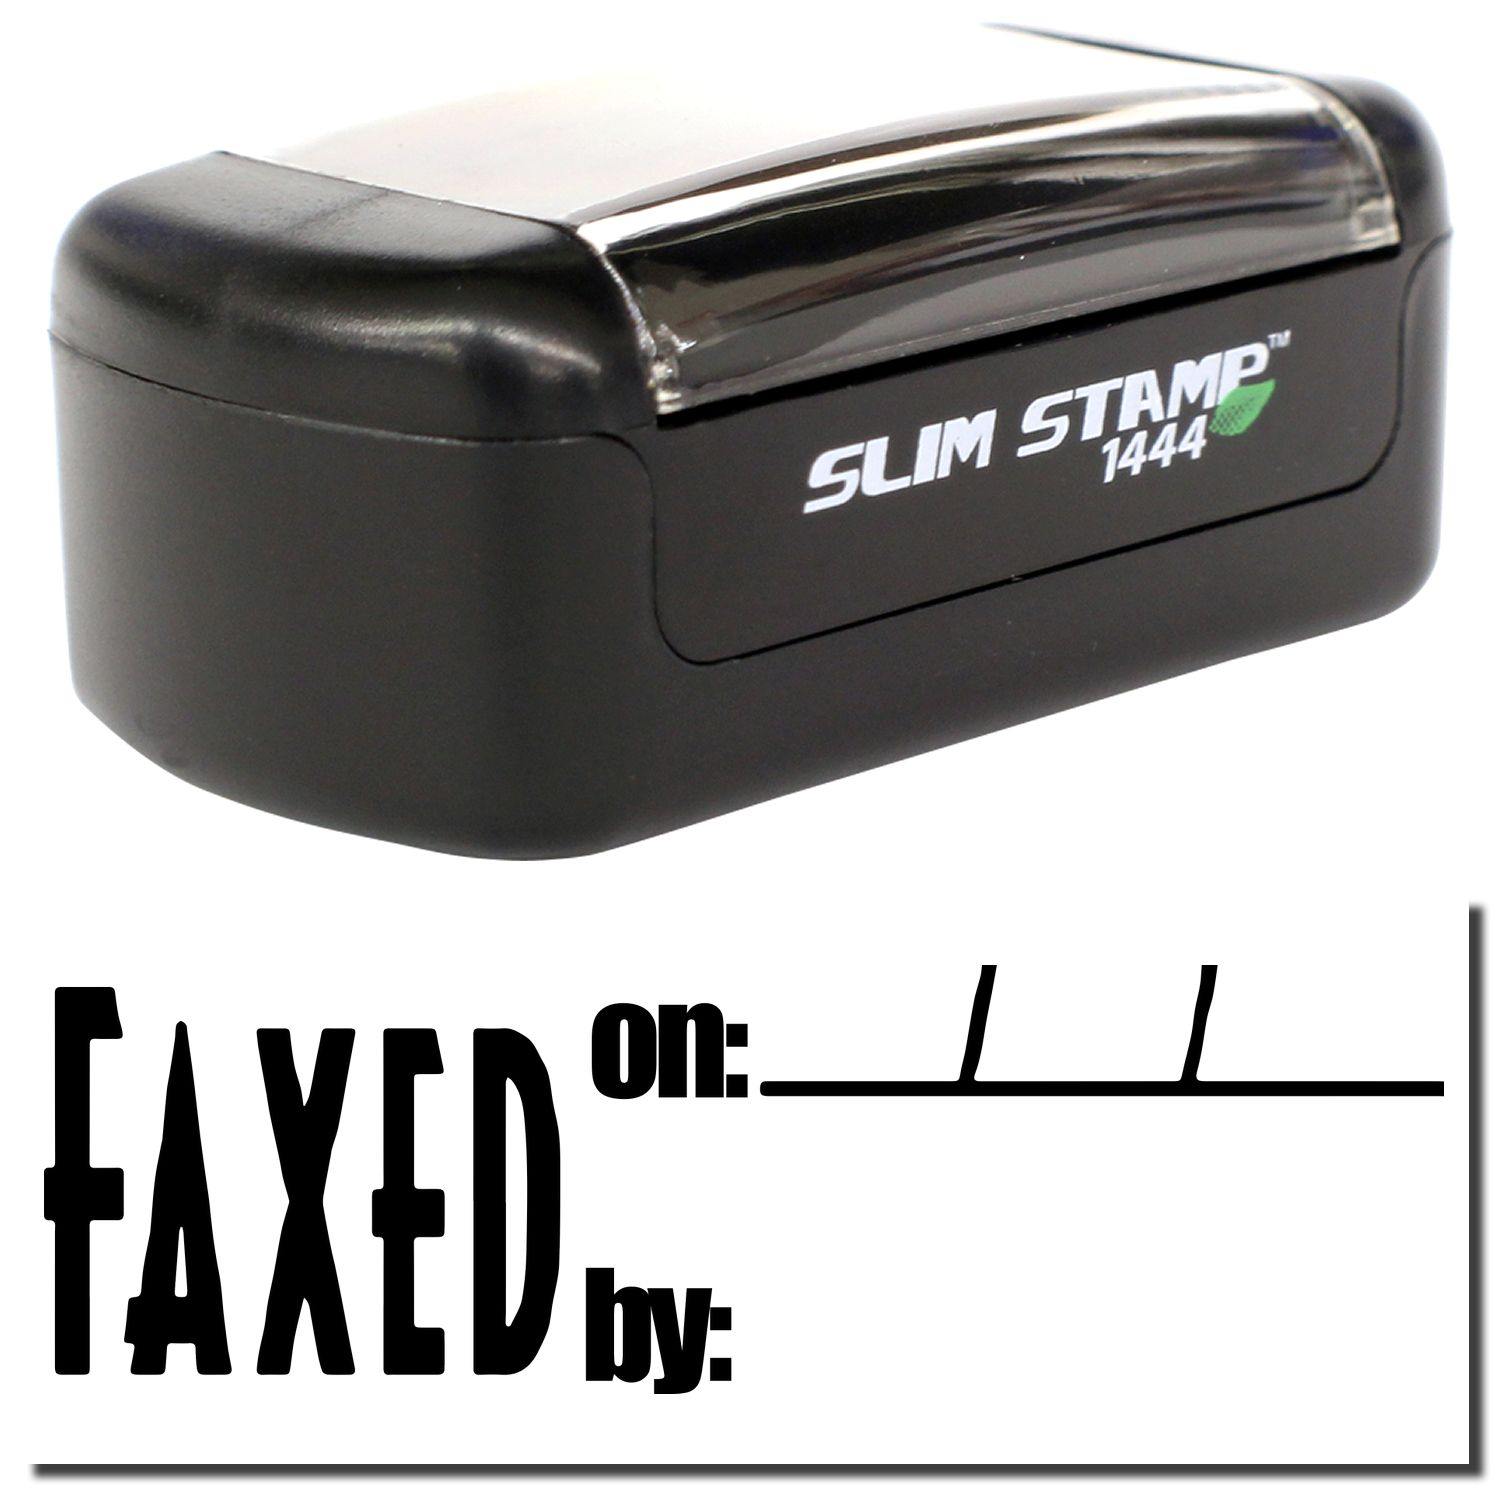 A stock office pre-inked stamp with a stamped image showing how the text "FAXED on:" in bold font with a space for writing the date and name of the person (by:) is displayed after stamping.